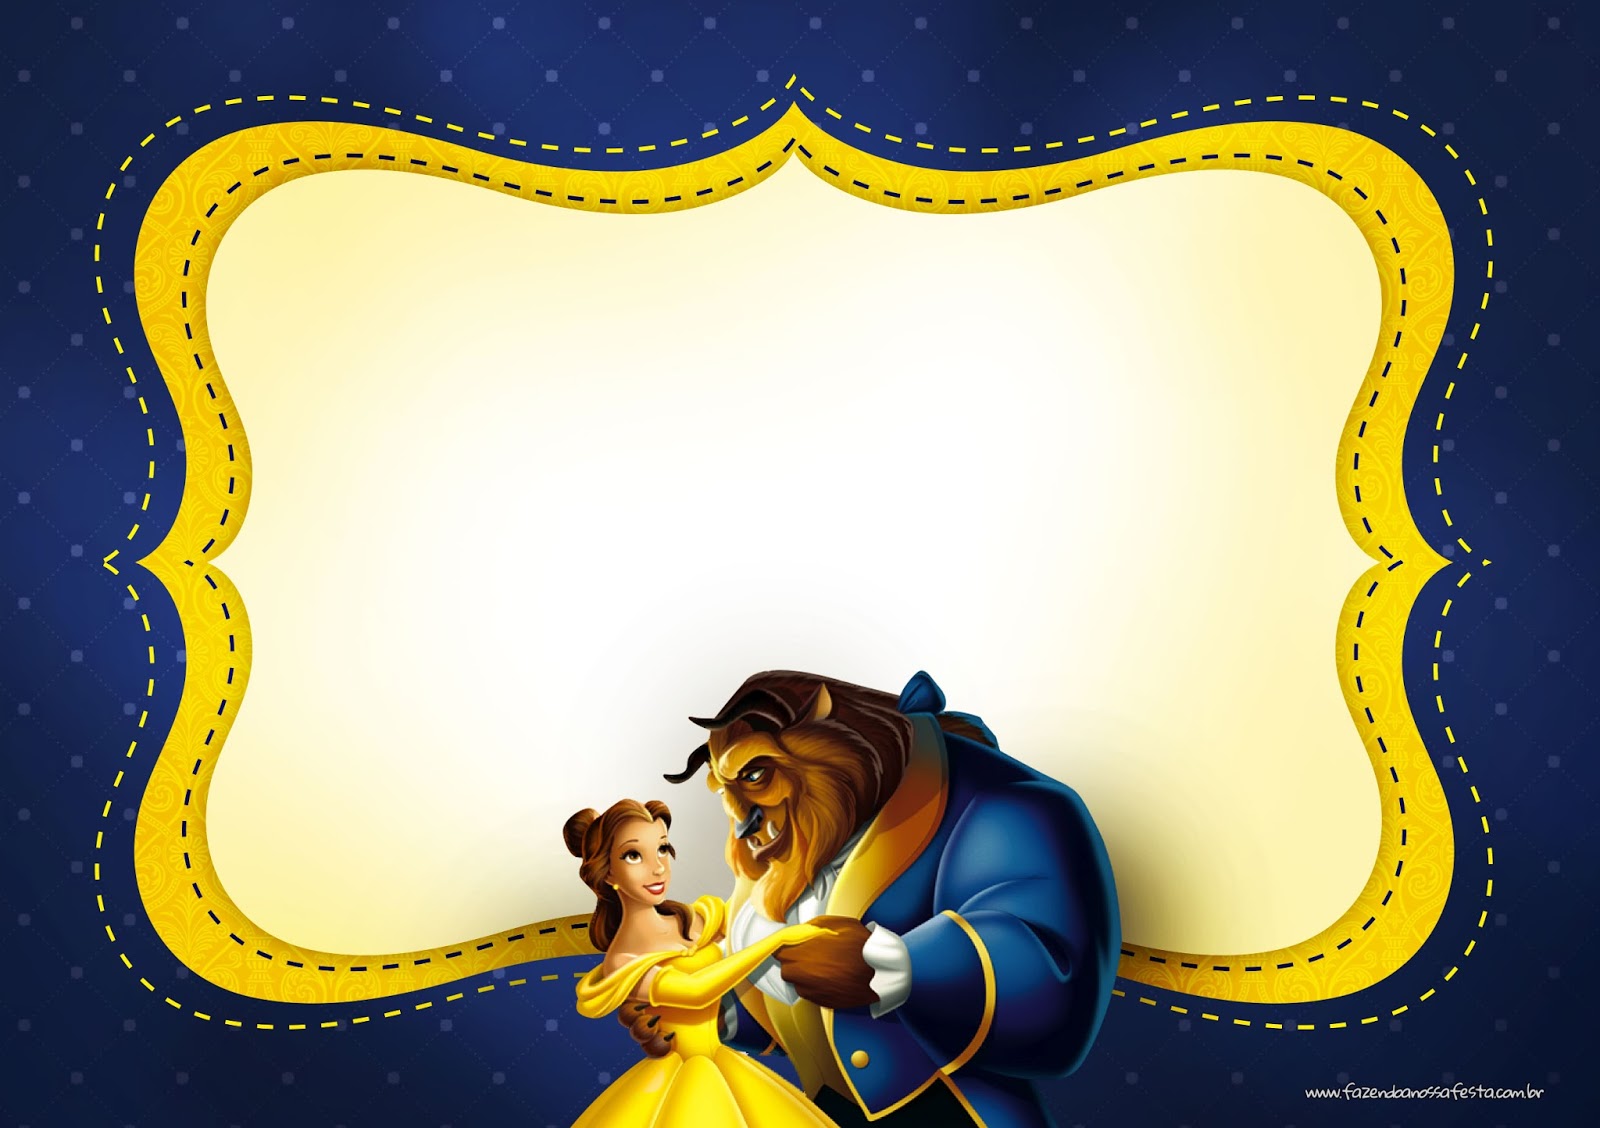 beauty-and-the-beast-party-free-printable-invitations-oh-my-fiesta